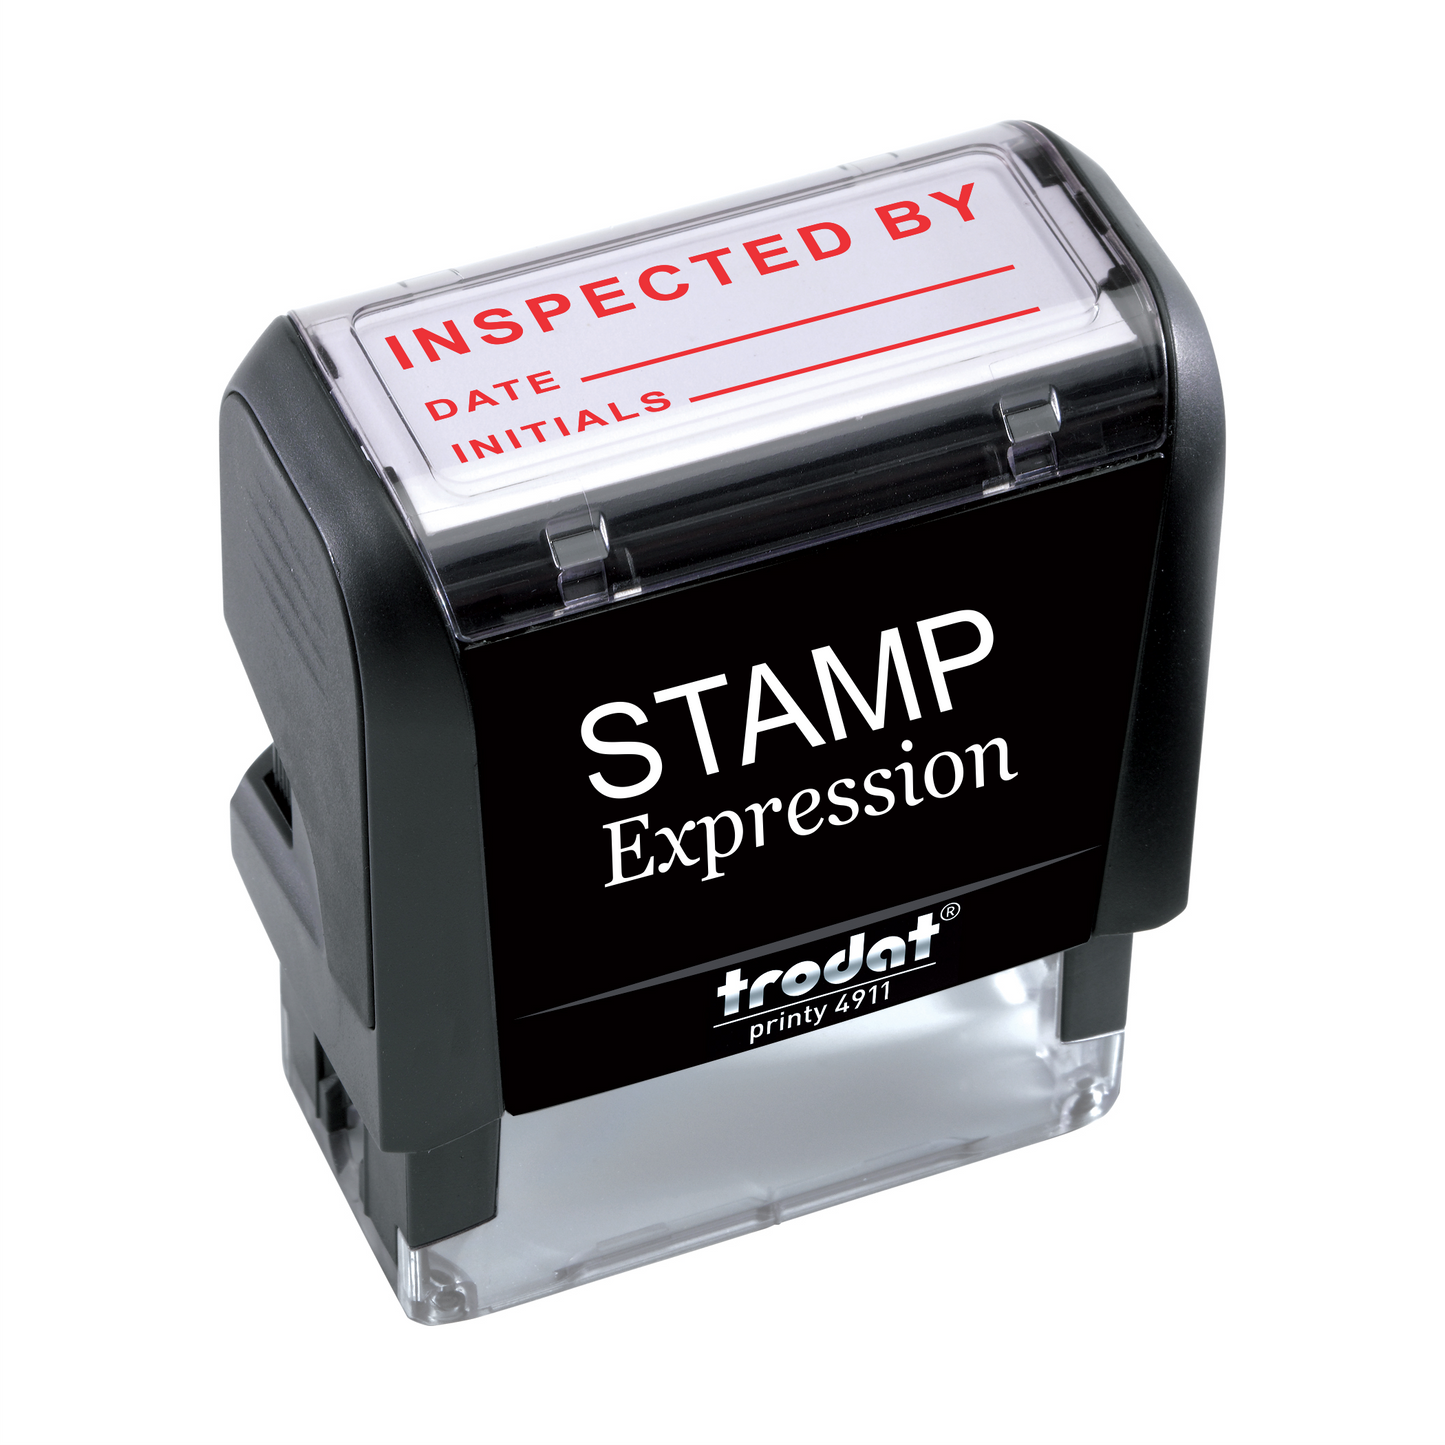 Inspected by Date and Initials Office Self Inking Rubber Stamp (SH-5920)